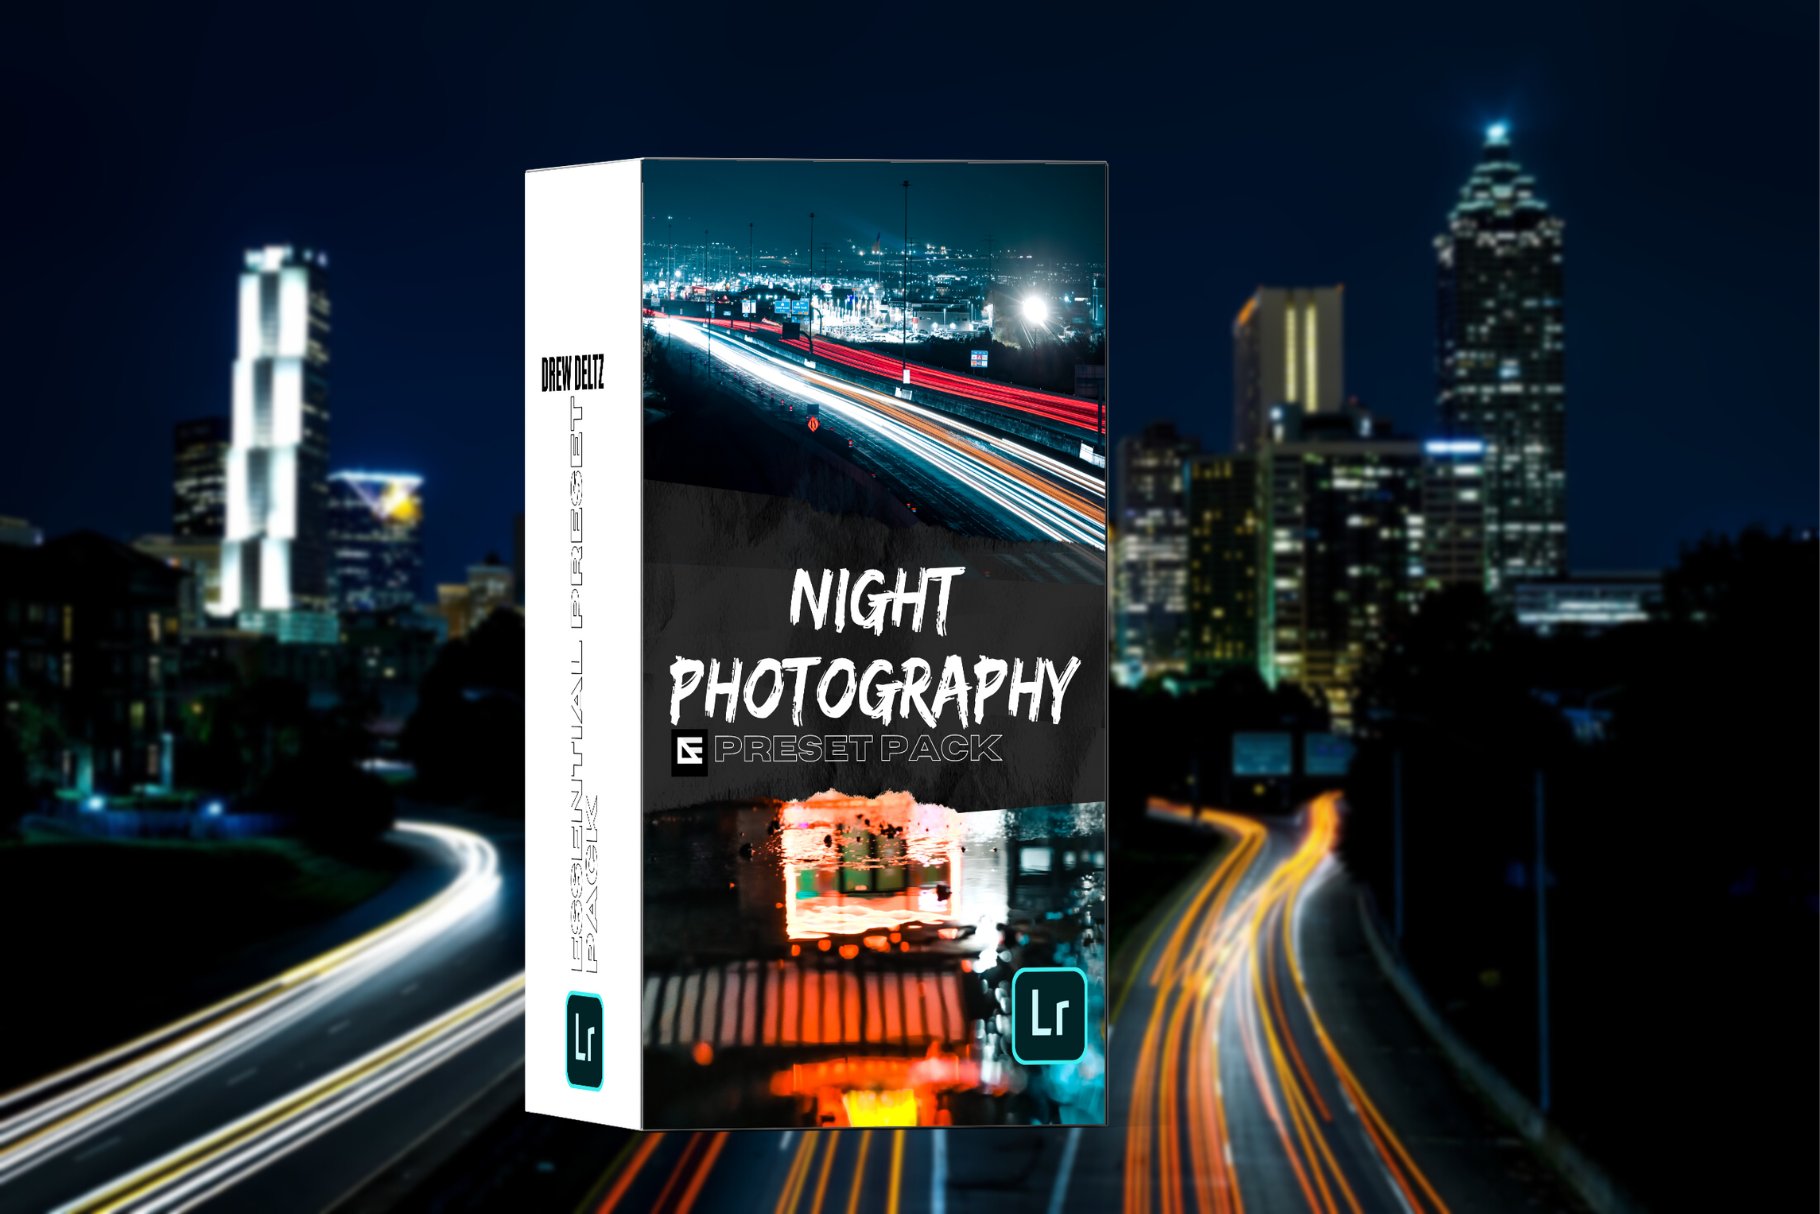 Night Photography Preset Packcover image.